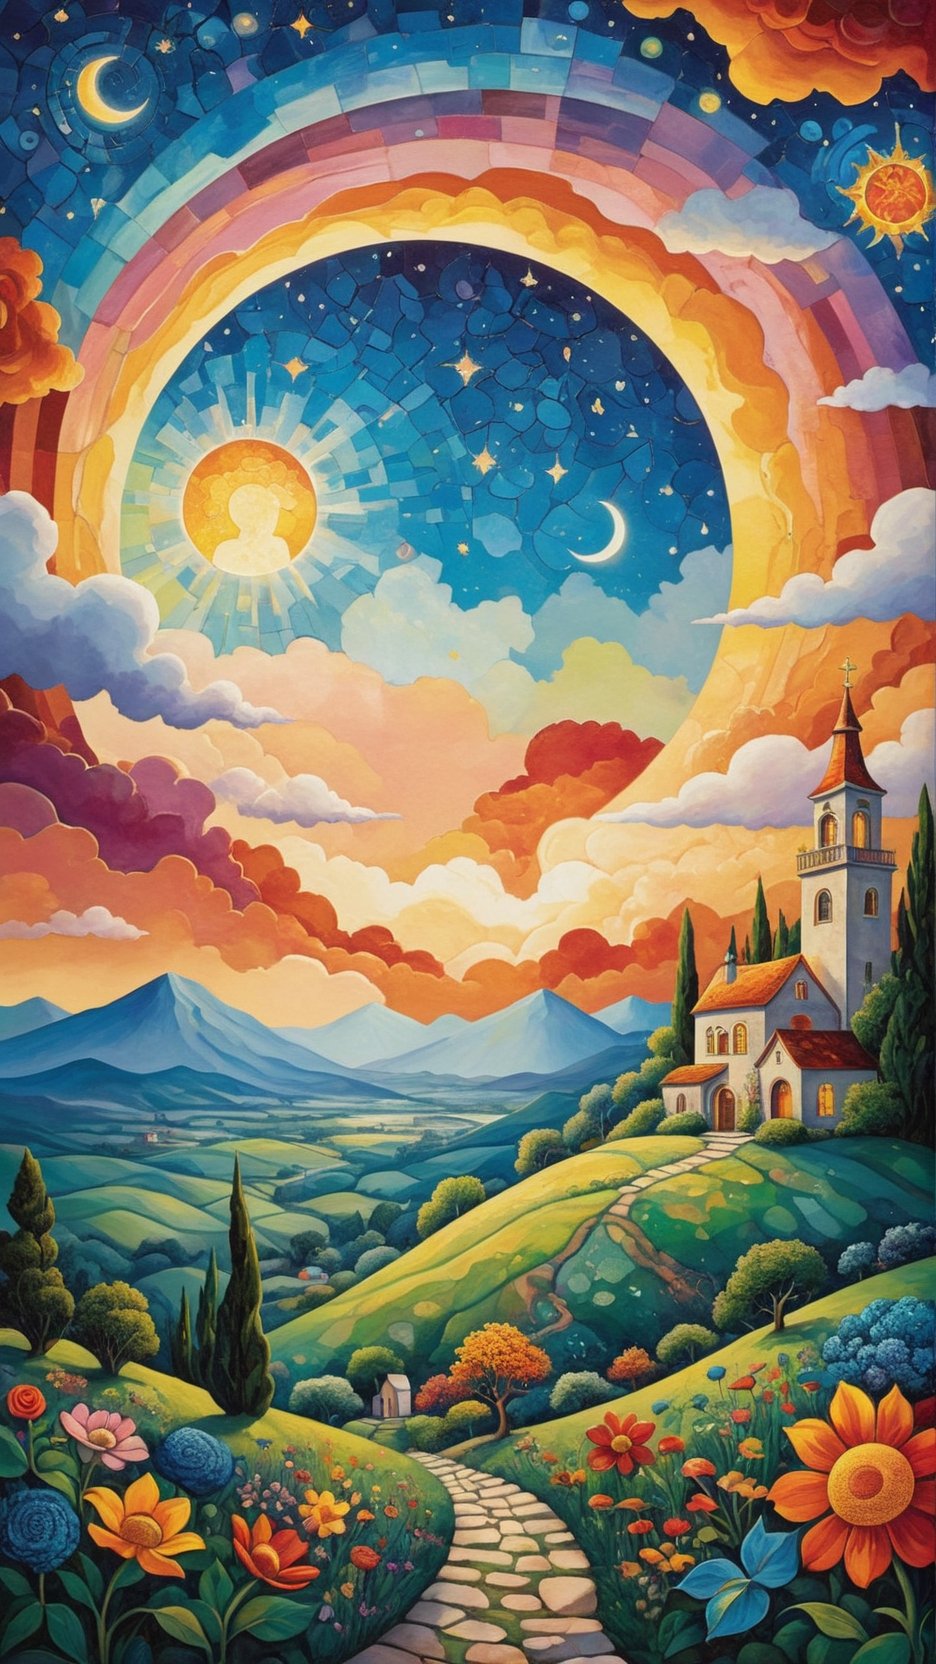 oil painting concept art, vibrant color, 

The Southern Star Atlas, (Teppei Sasakura style:1.5),  (Pointillism:1.3), (papercutting:1.2), cutout picture, (HDR:1.4), high contrast, intricately stained glass,

sunset, 1 Crescent moon, Cumulonimbus clouds with angel halo, a vibrant colorful stained glass clouds, (1 large stained glass sun flying in the sunset sky:1.3), Create a whimsical and vibrant flower garden townscape with colorful, fantastical buildings, many strange buildings, hill of a vibrant town, The color palette include vibrant warm colors with contrasting highlights and shadows to give depth, The brushwork is rough with clean lines for the buildings and more fluid strokes for the sky and water reflections, The overall art style evoke elements of surrealism mixed with folk art, Draw inspiration from artists like Marc Chagall for dreamlike scenes and Joan Miró for bold colors and shapes,

a image for a póster of psytrance festival, contains fractals, spiritual composition, the imagen evoke happiness and energy. the imagen contains organic textures and surreal composition. some parts of the image evoke a las trip,